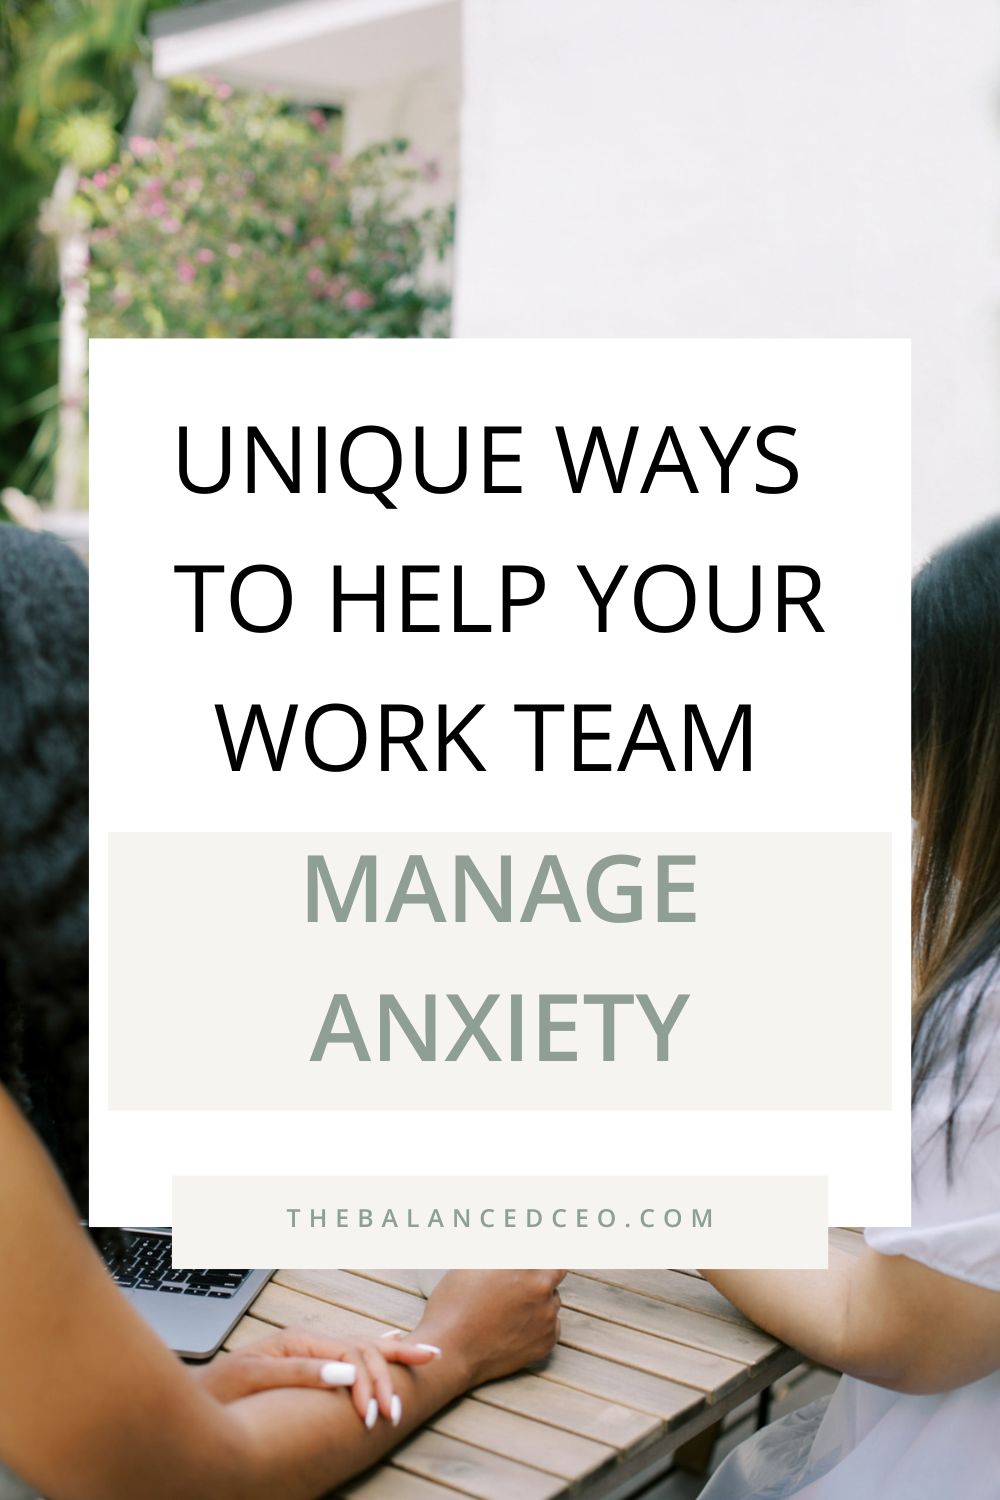 Unique Ways to Help Your Work Team Manage Anxiety